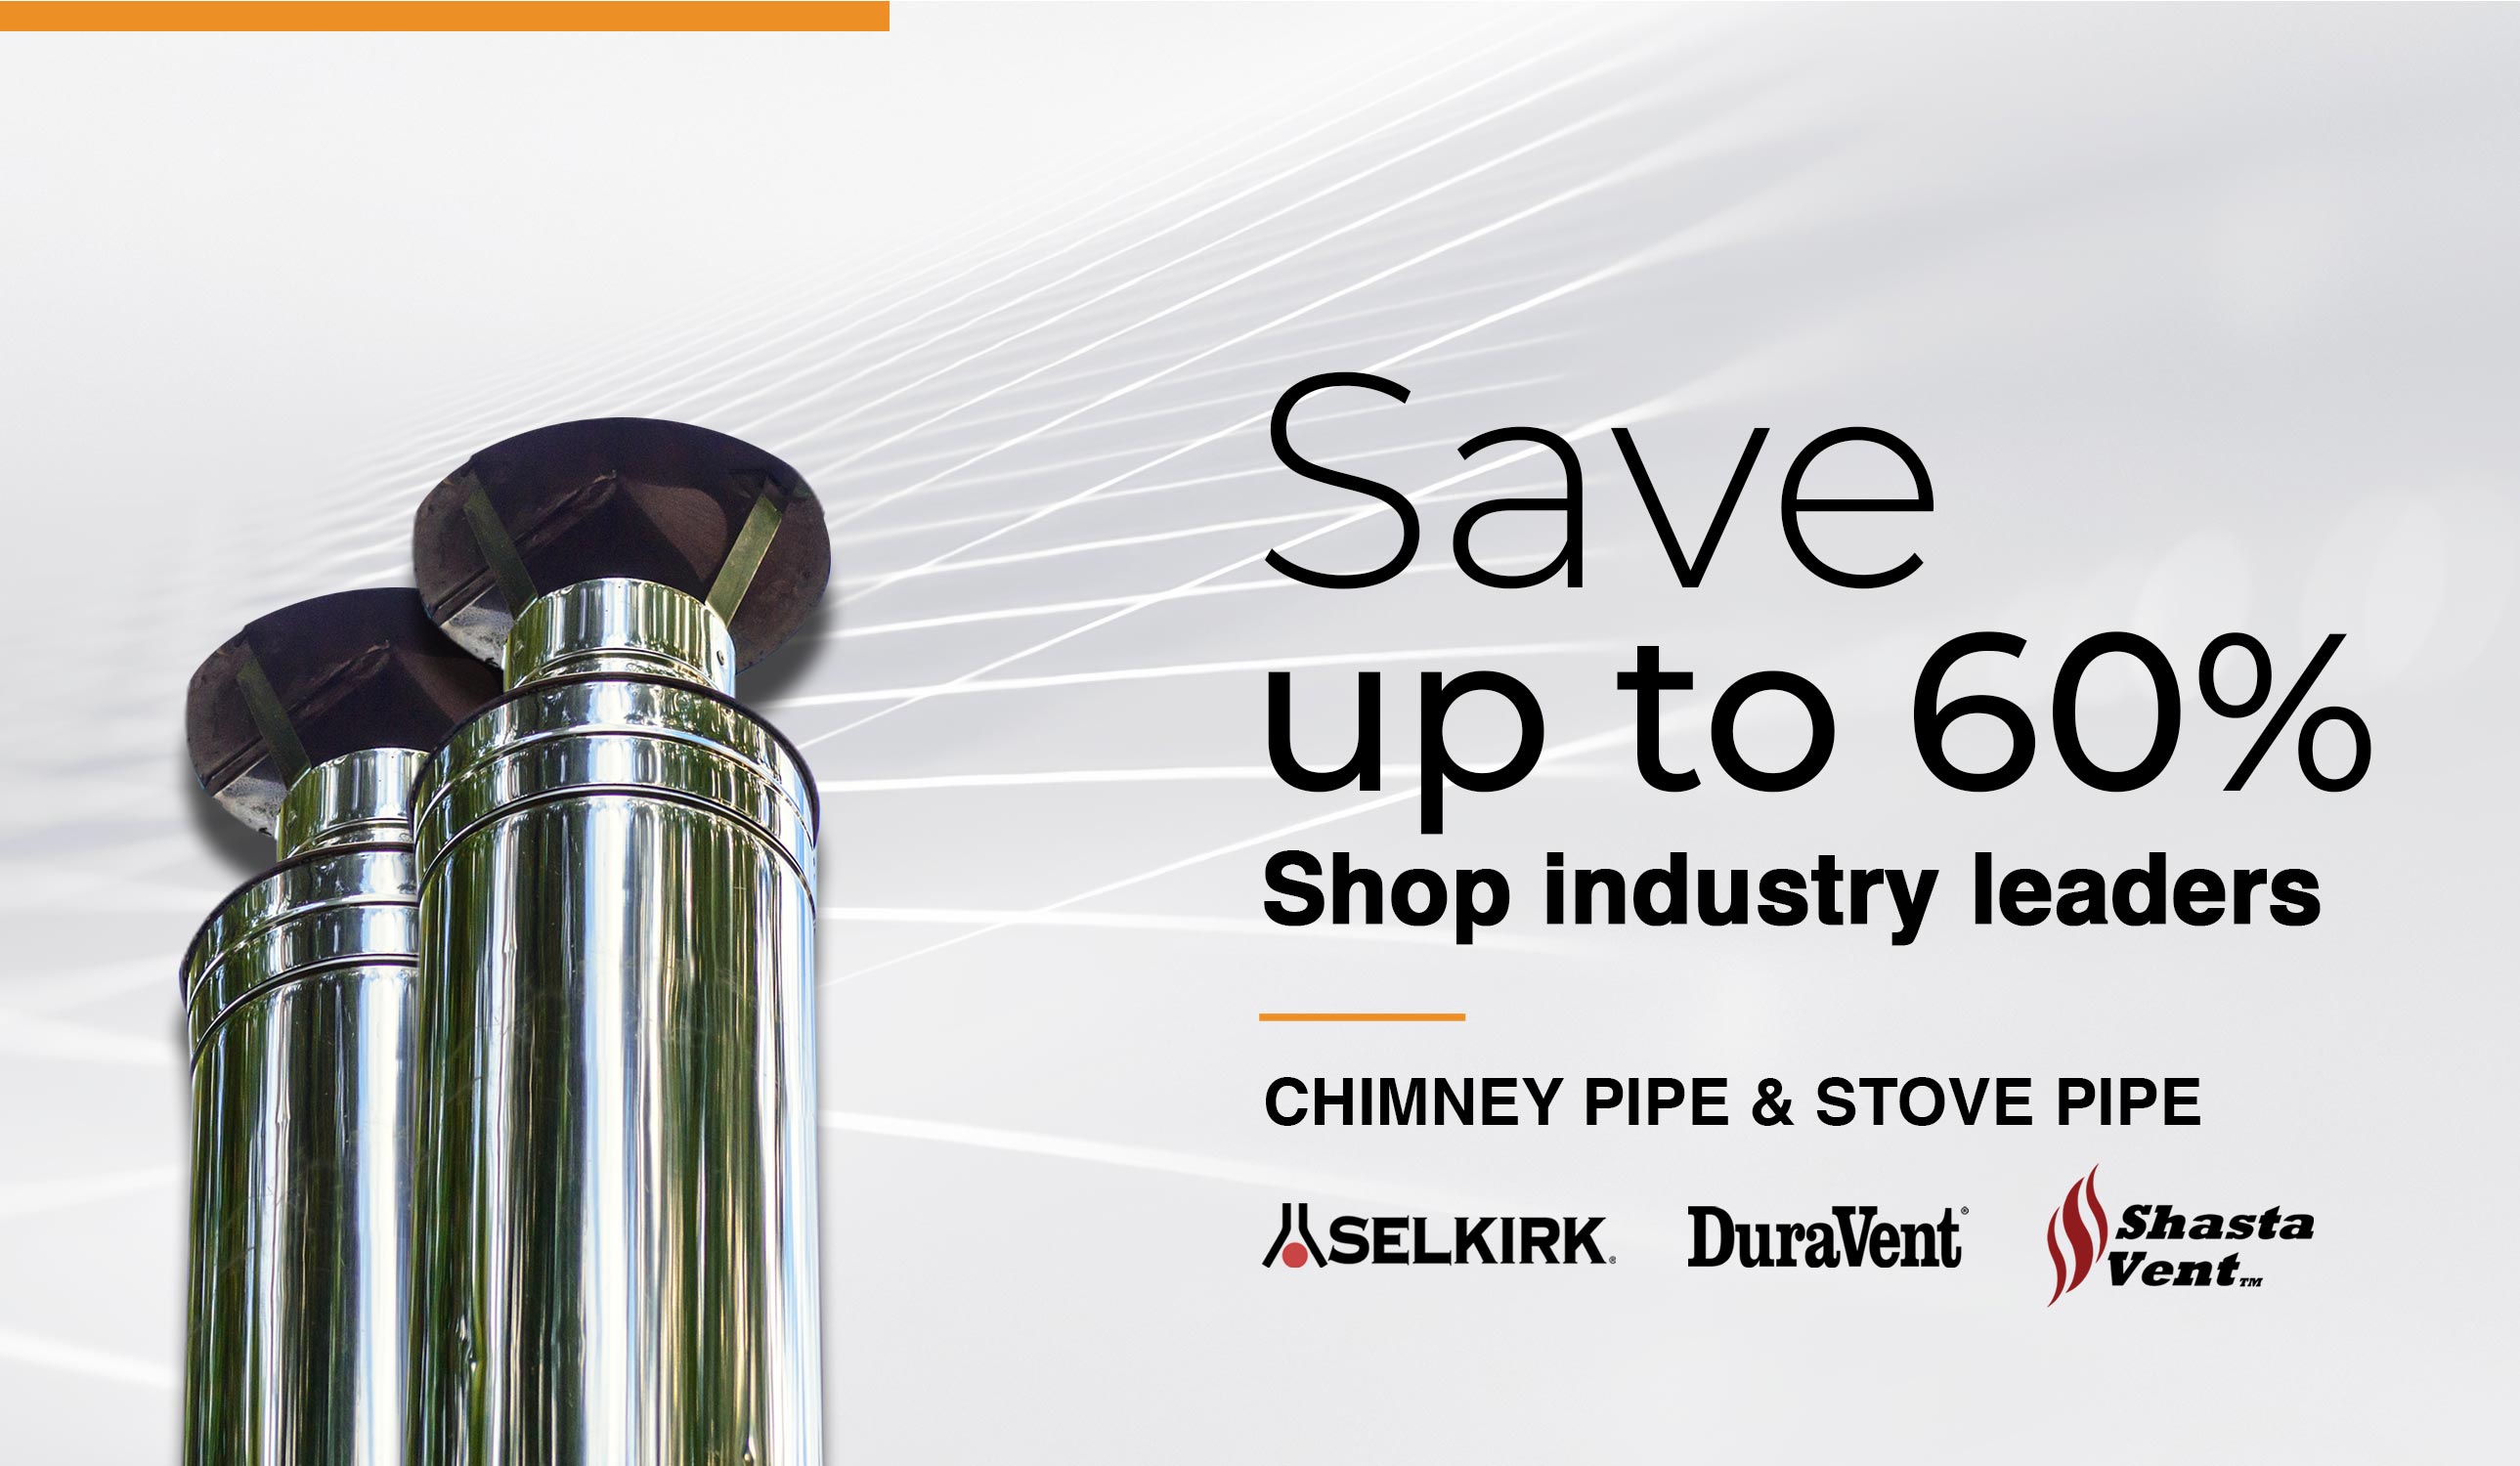 Chimney Pipe & Stove Pipe, Save Up to 60% Shop the Industry Leaders, DuraVent, ShastaVent, & Selkirk.